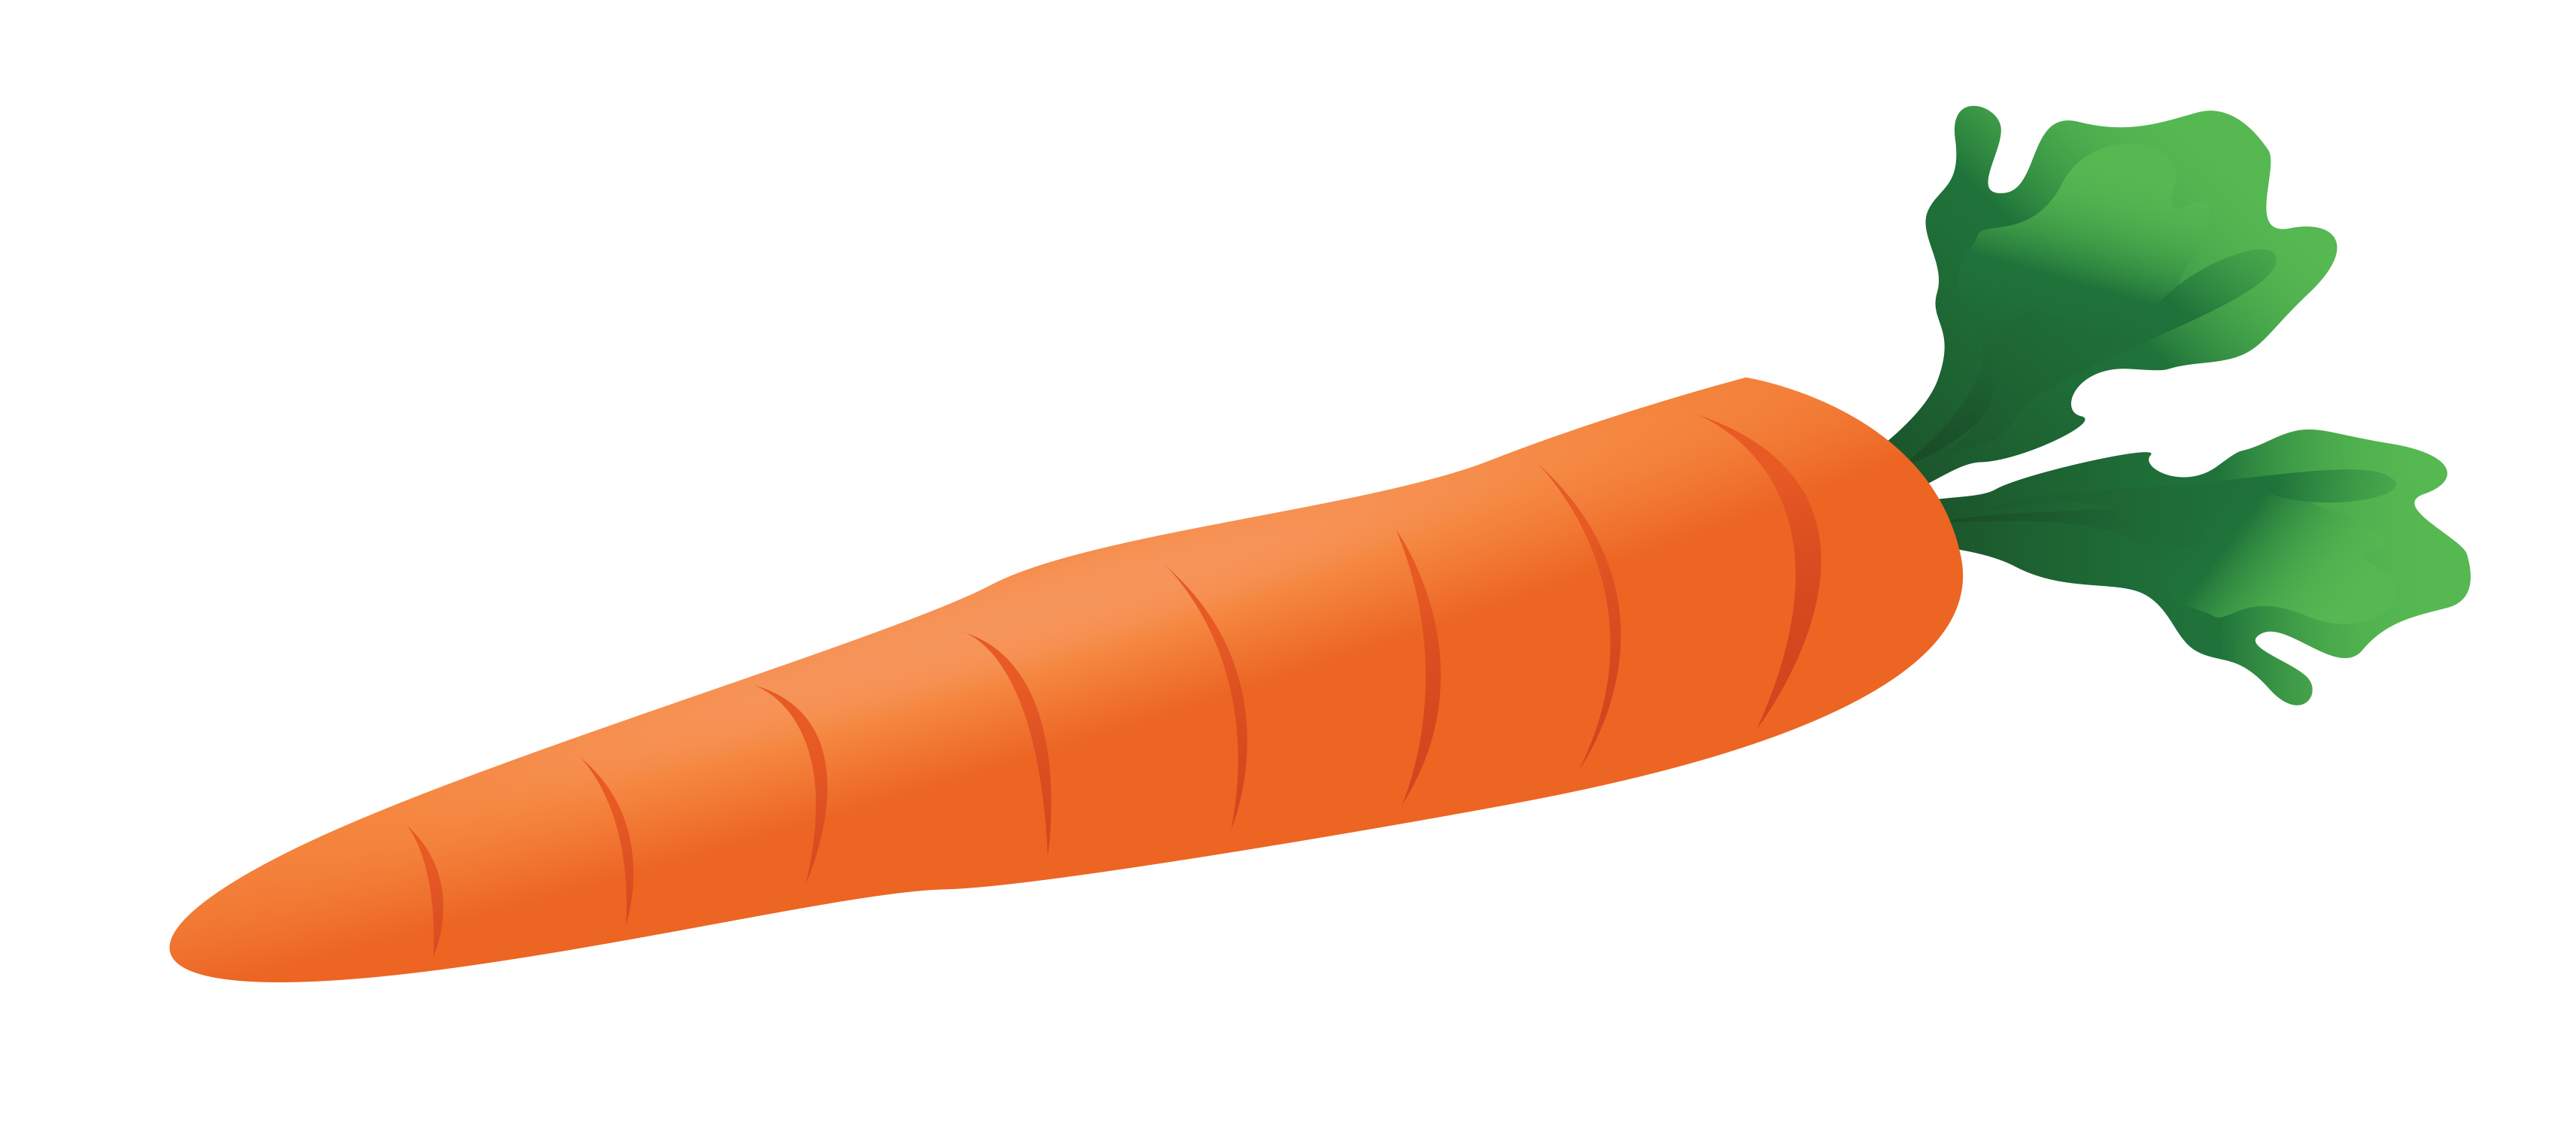 View Carrot Jpg Clipart Free Nutrition And Healthy Food Clipart